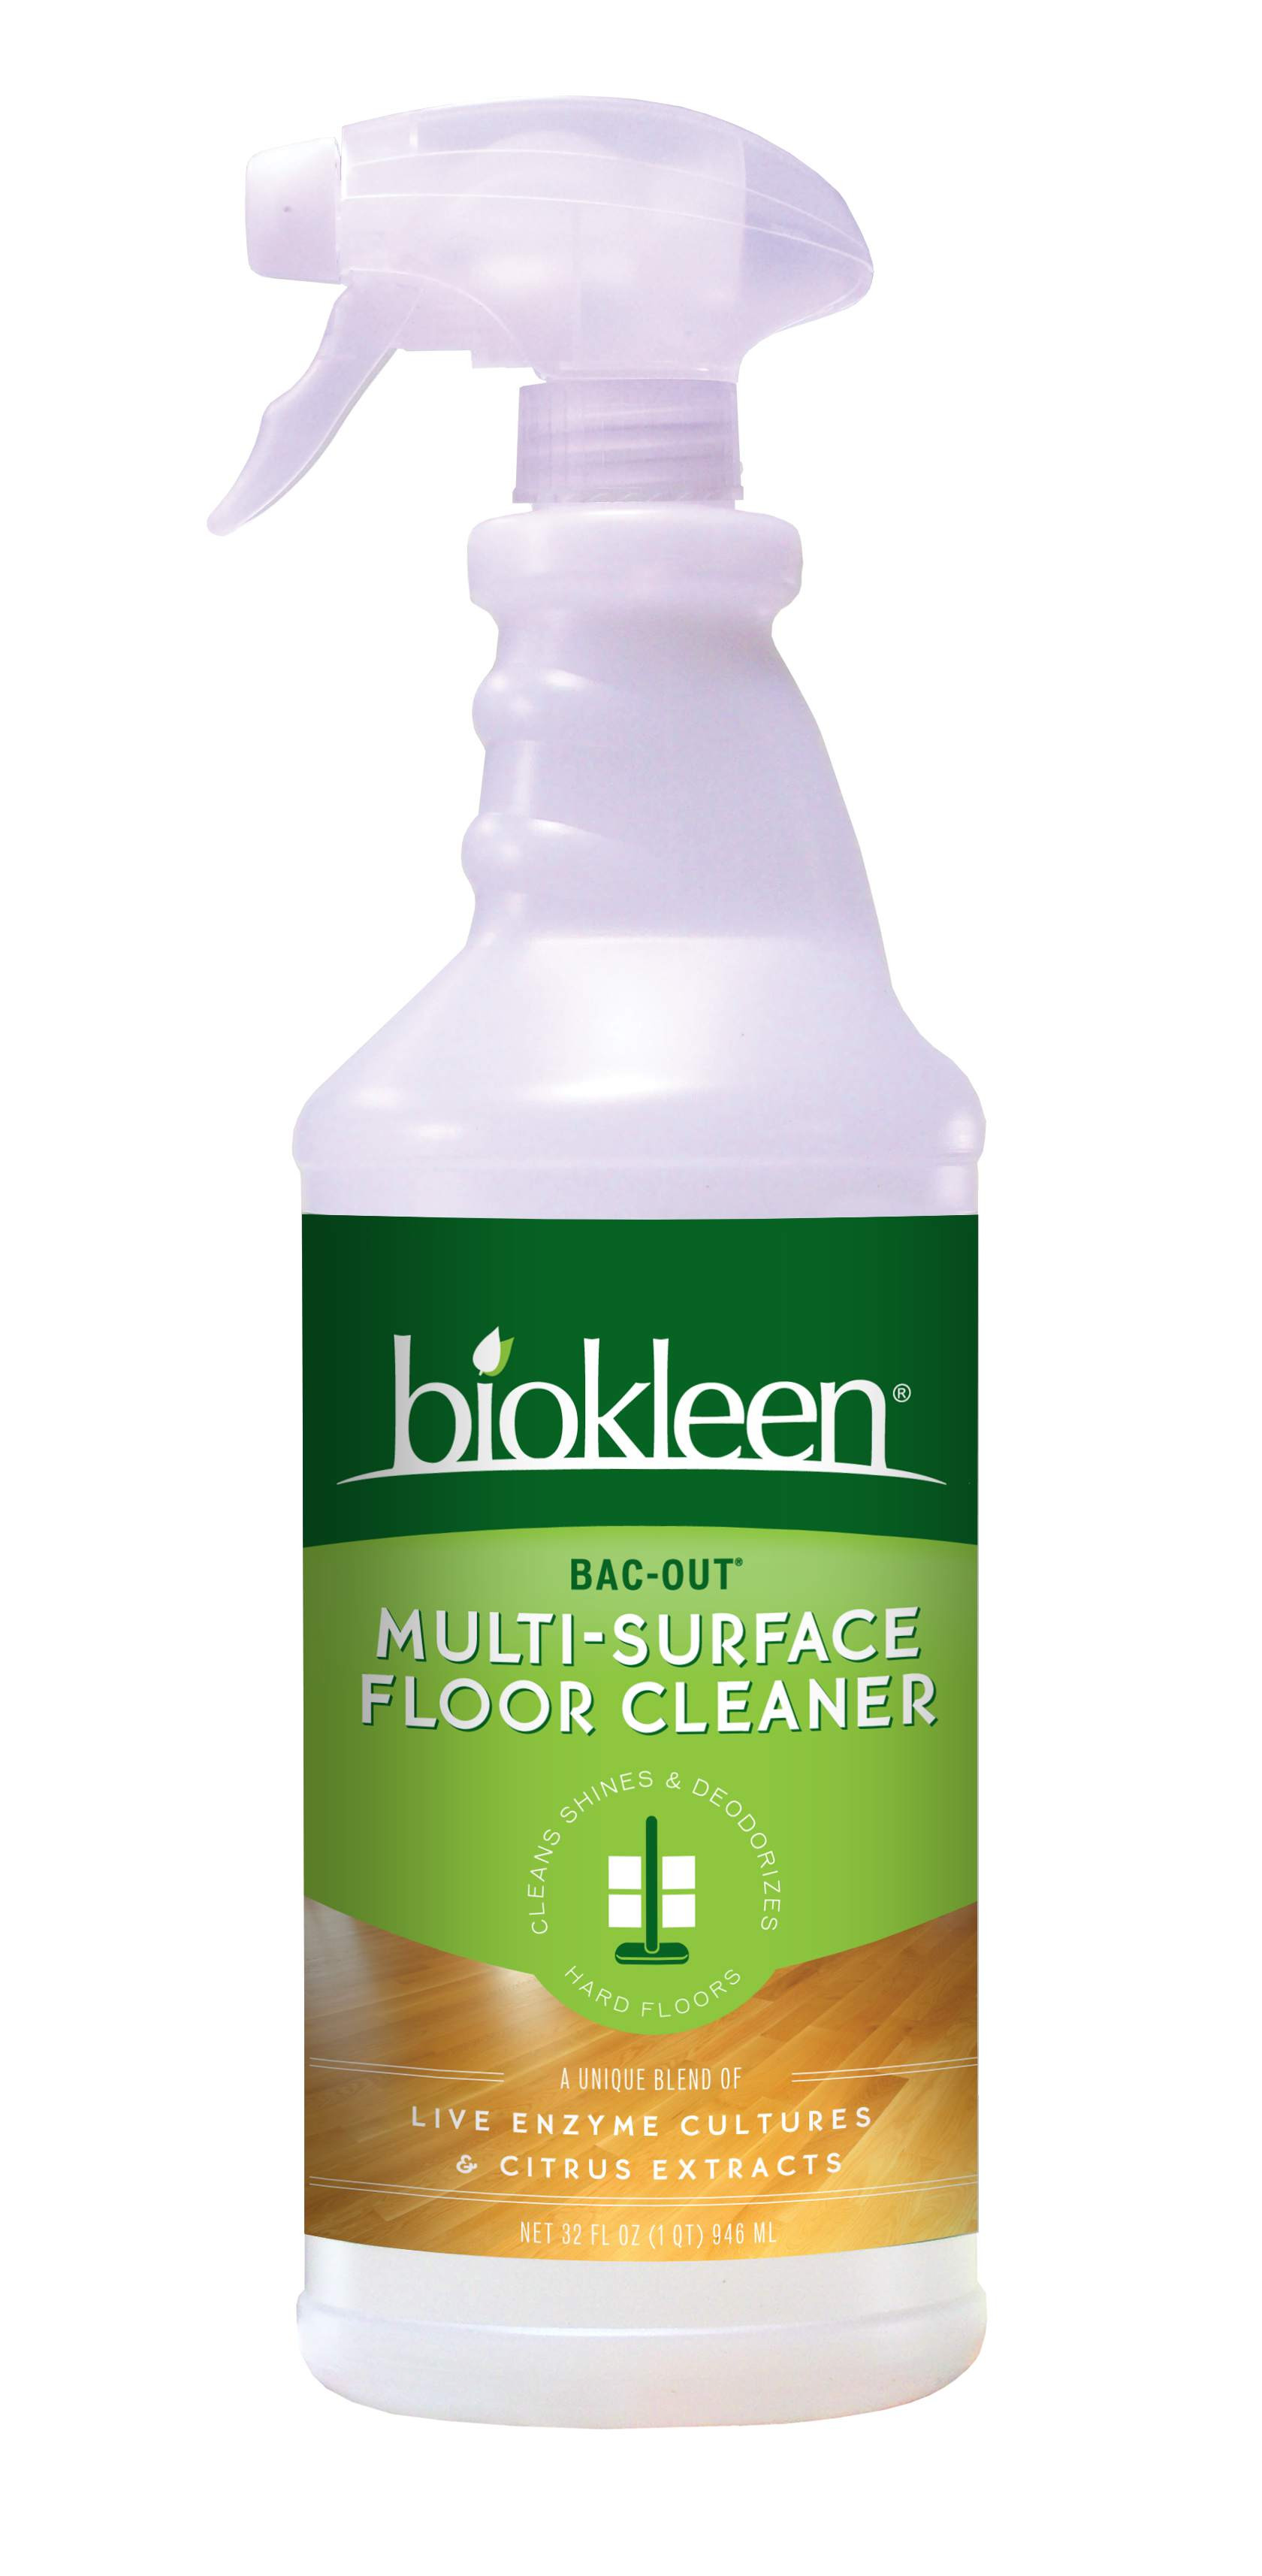 pet safe hardwood floor cleaner of adore your wood floors with these eco friendly cleaners intended for biokleen bacout floorcleaner 32 56a45e345f9b58b7d0d69e0d